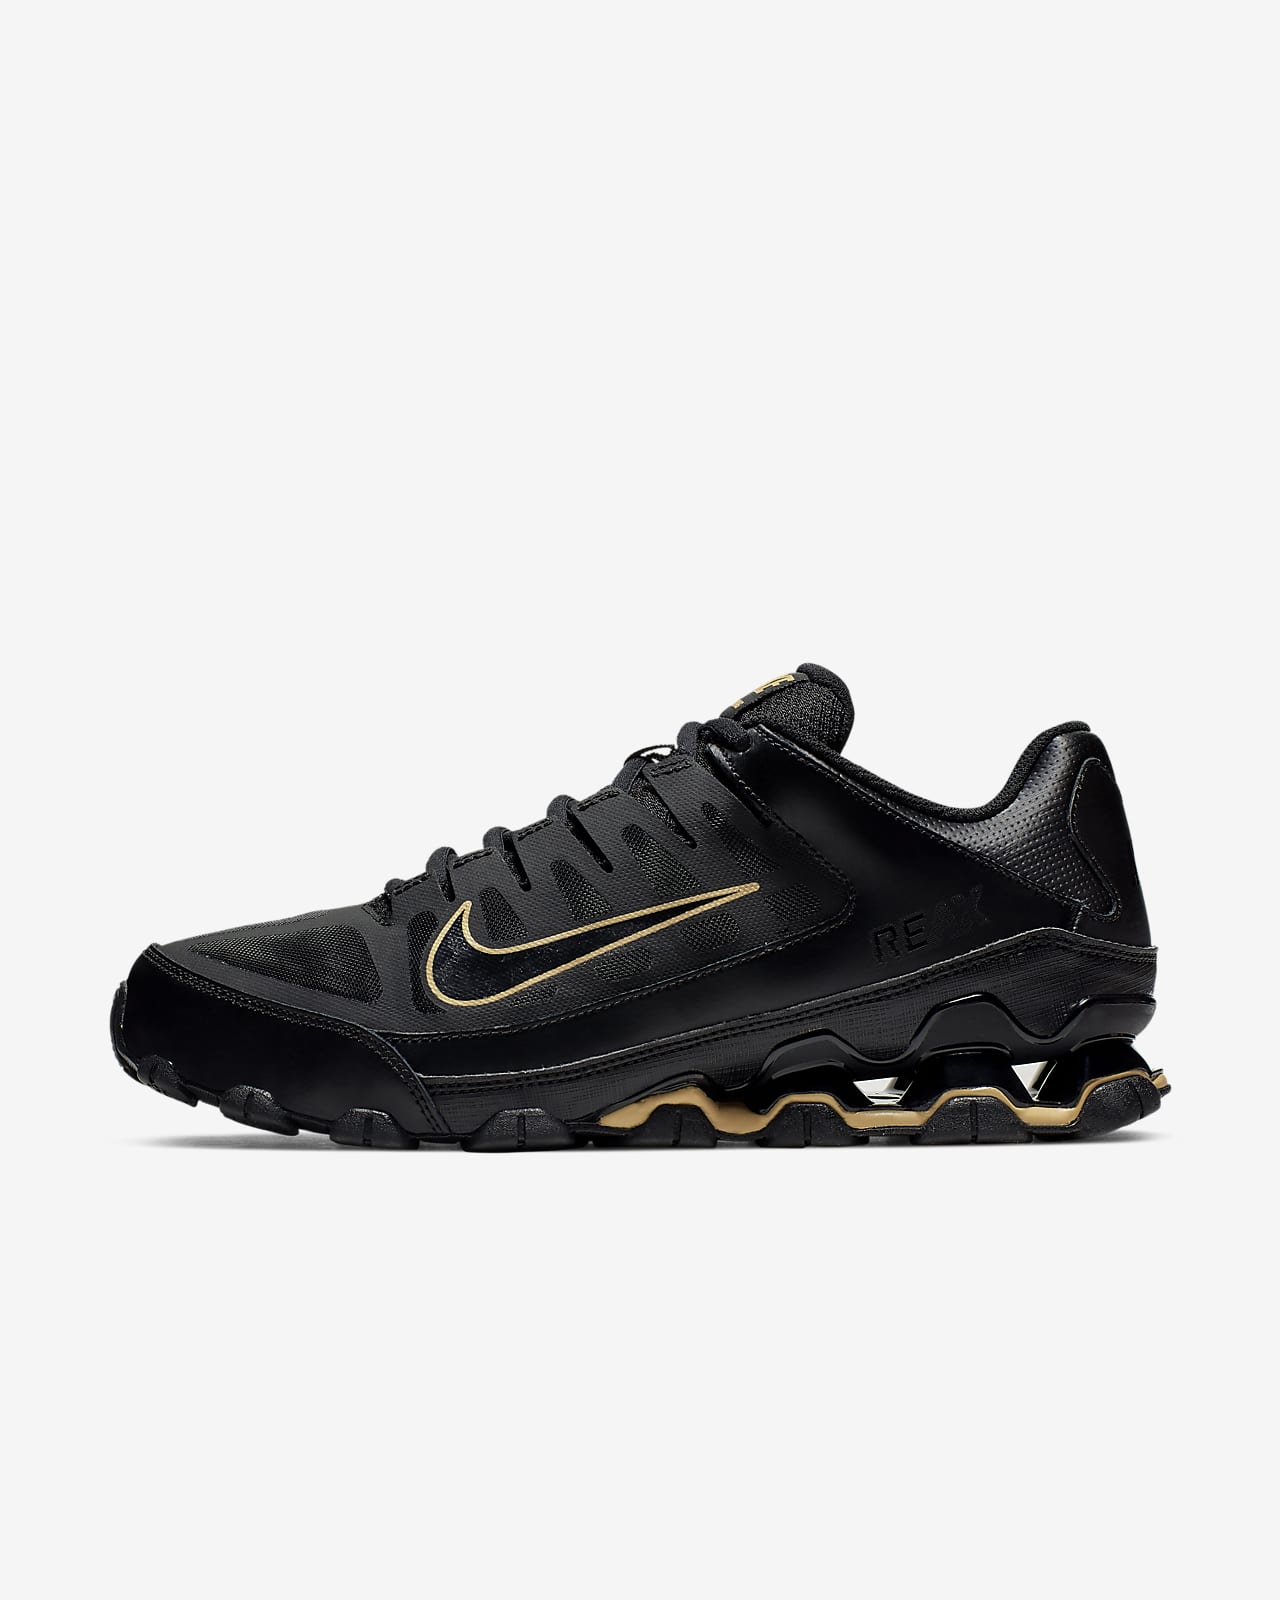 men's nike black and gold tennis shoes